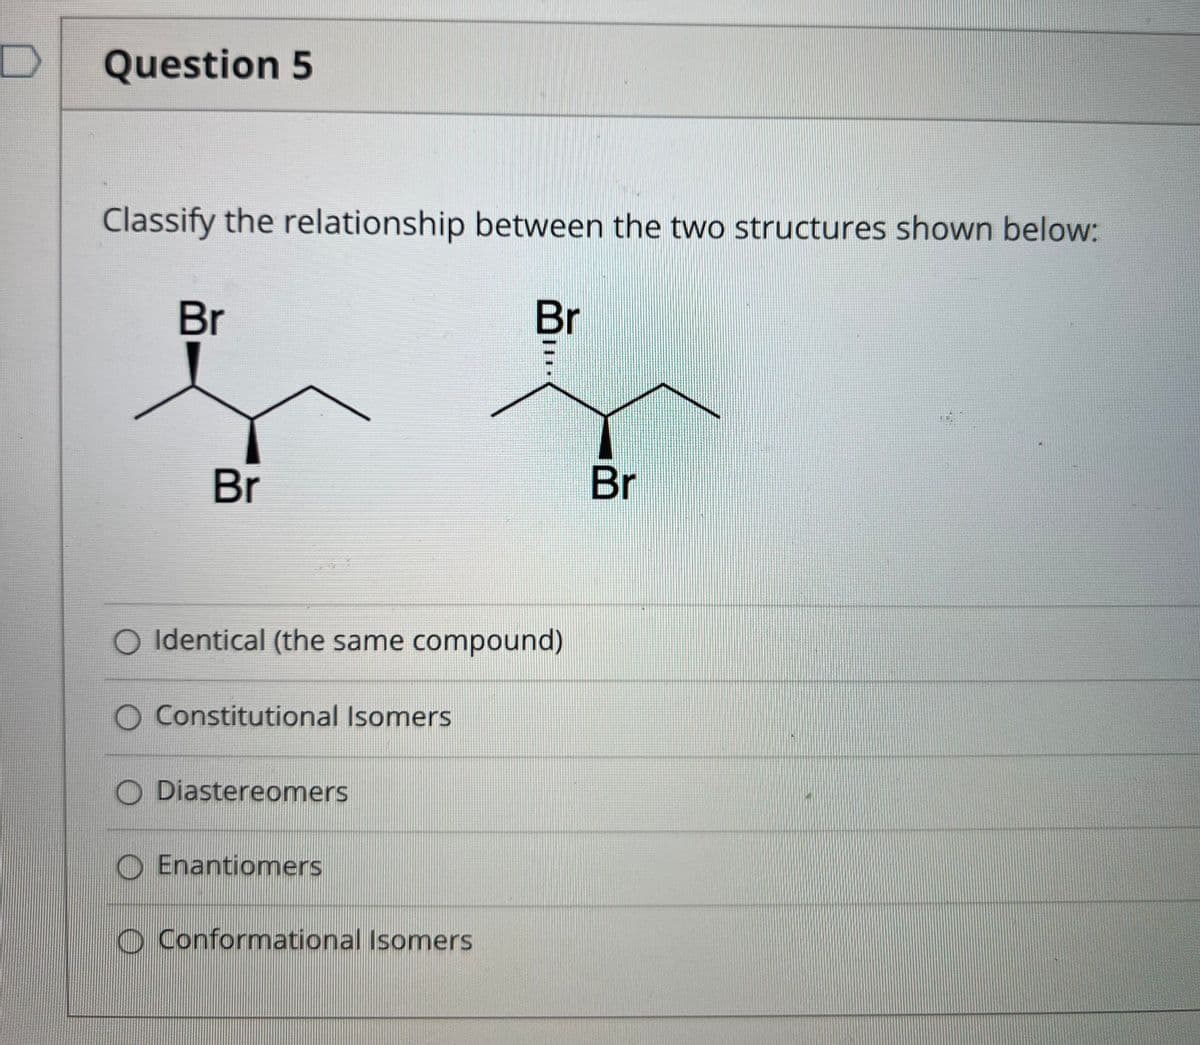 Question 5
Classify the relationship between the two structures shown below:
Br
Br
Br
Br
O Identical (the same compound)
O Constitutional Isomers
O Diastereomers
O Enantiomers
O Conformational Isomers
